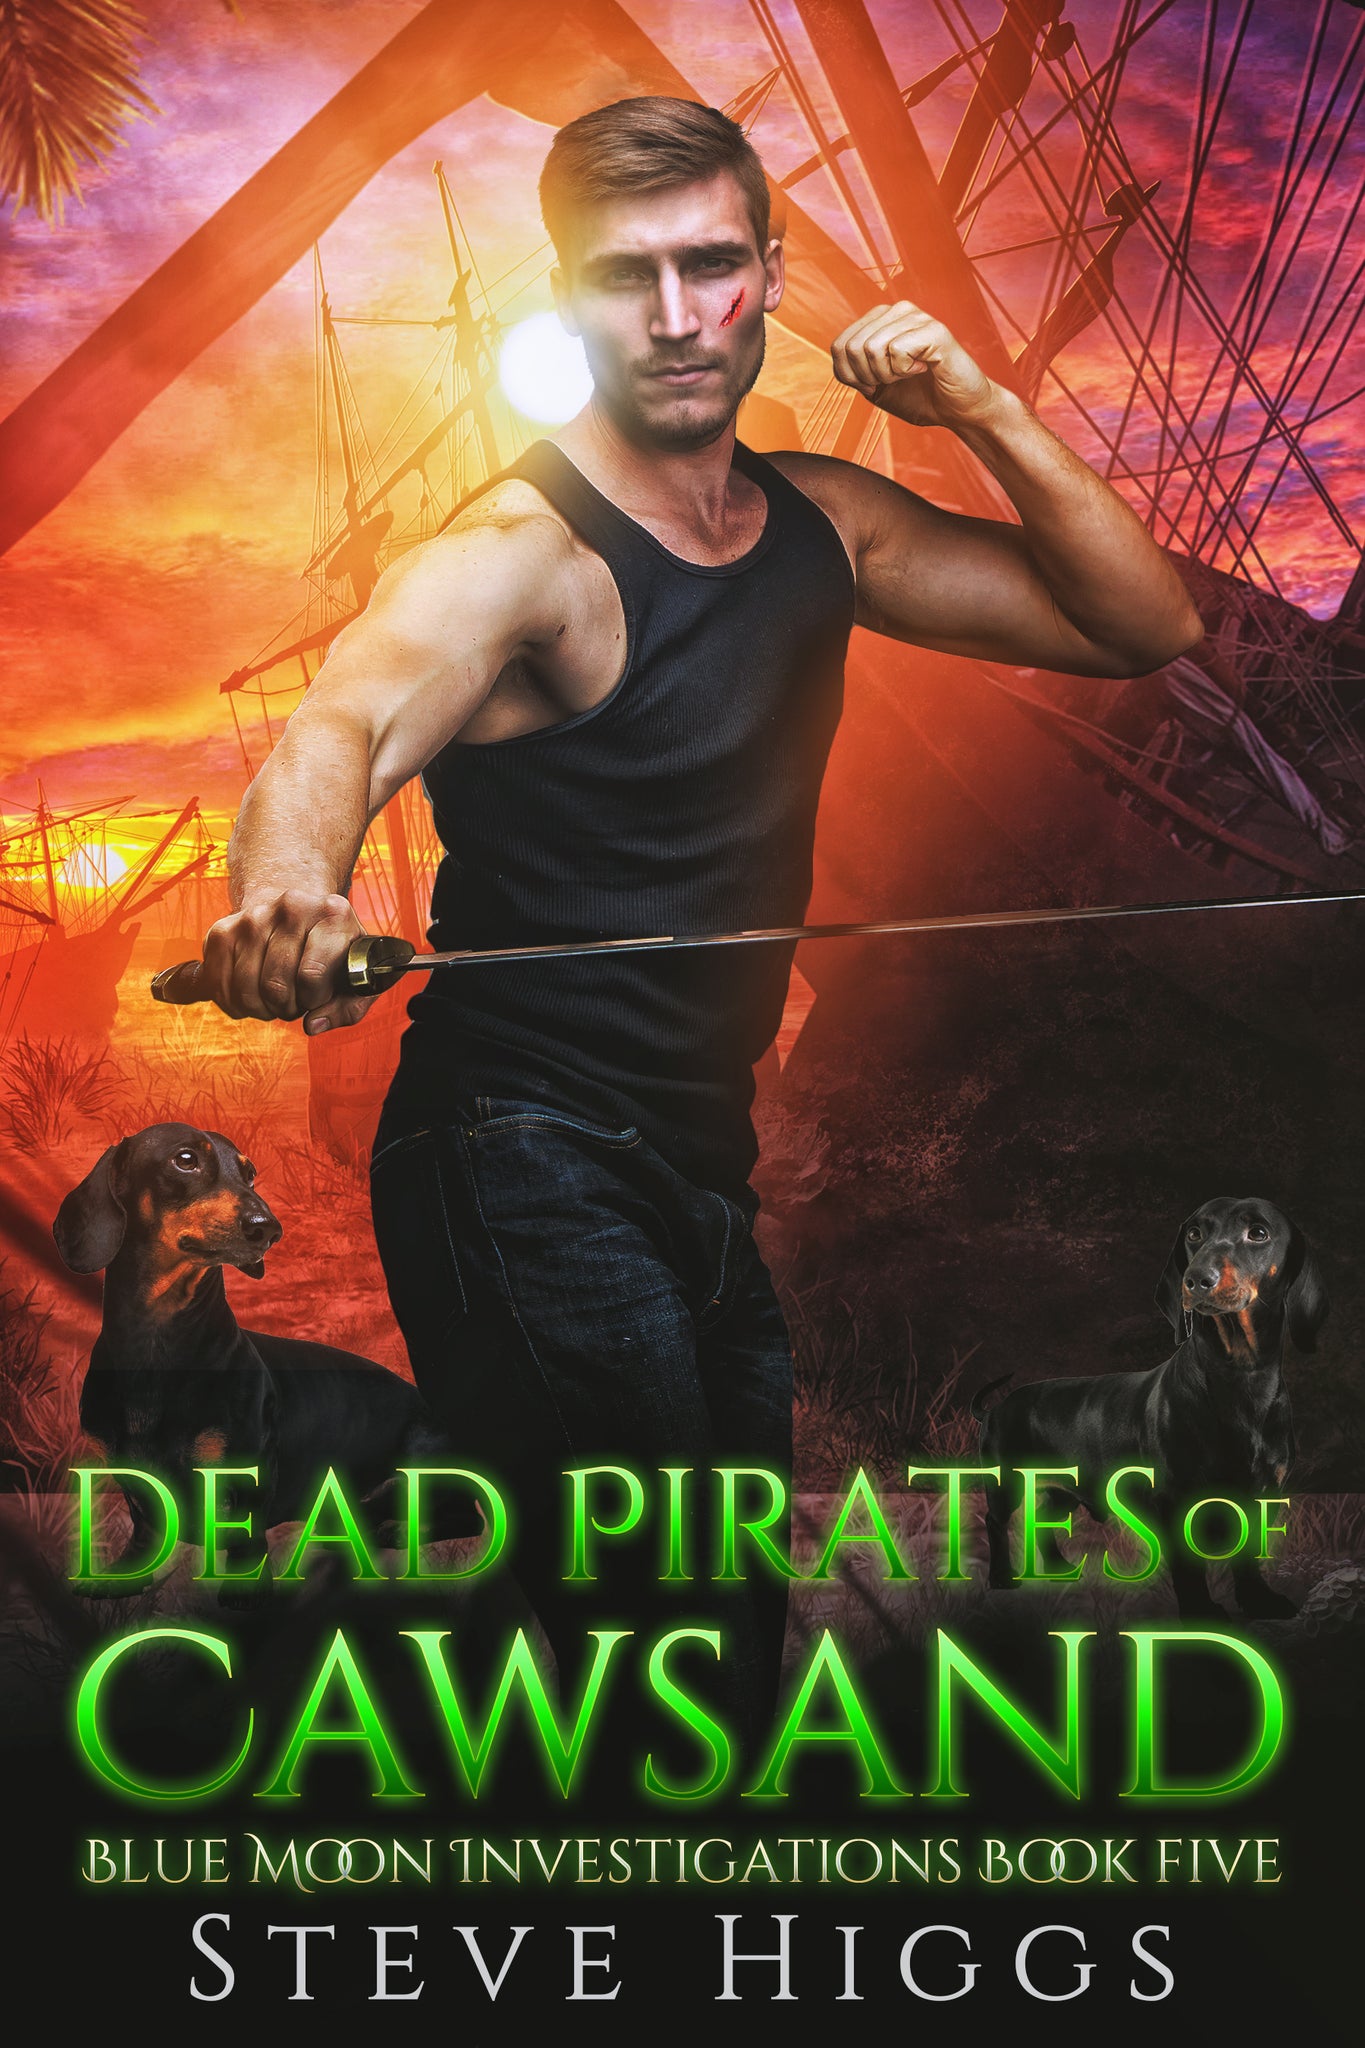 Dead Pirates of Cawsand : Blue Moon Investigations Book 5